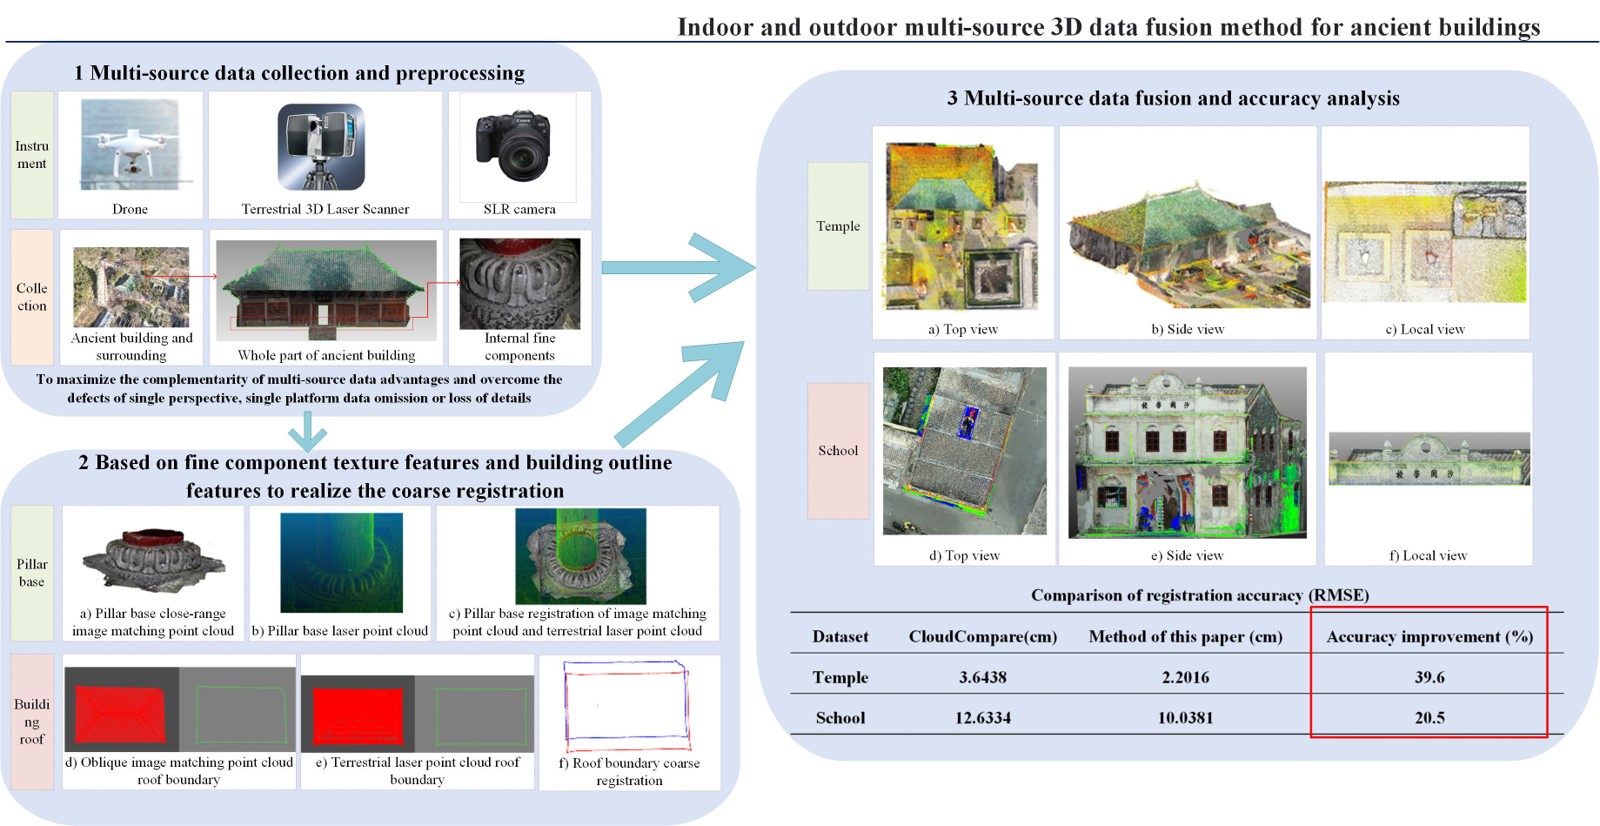 Indoor and outdoor multi-source 3D data fusion method for ancient buildings